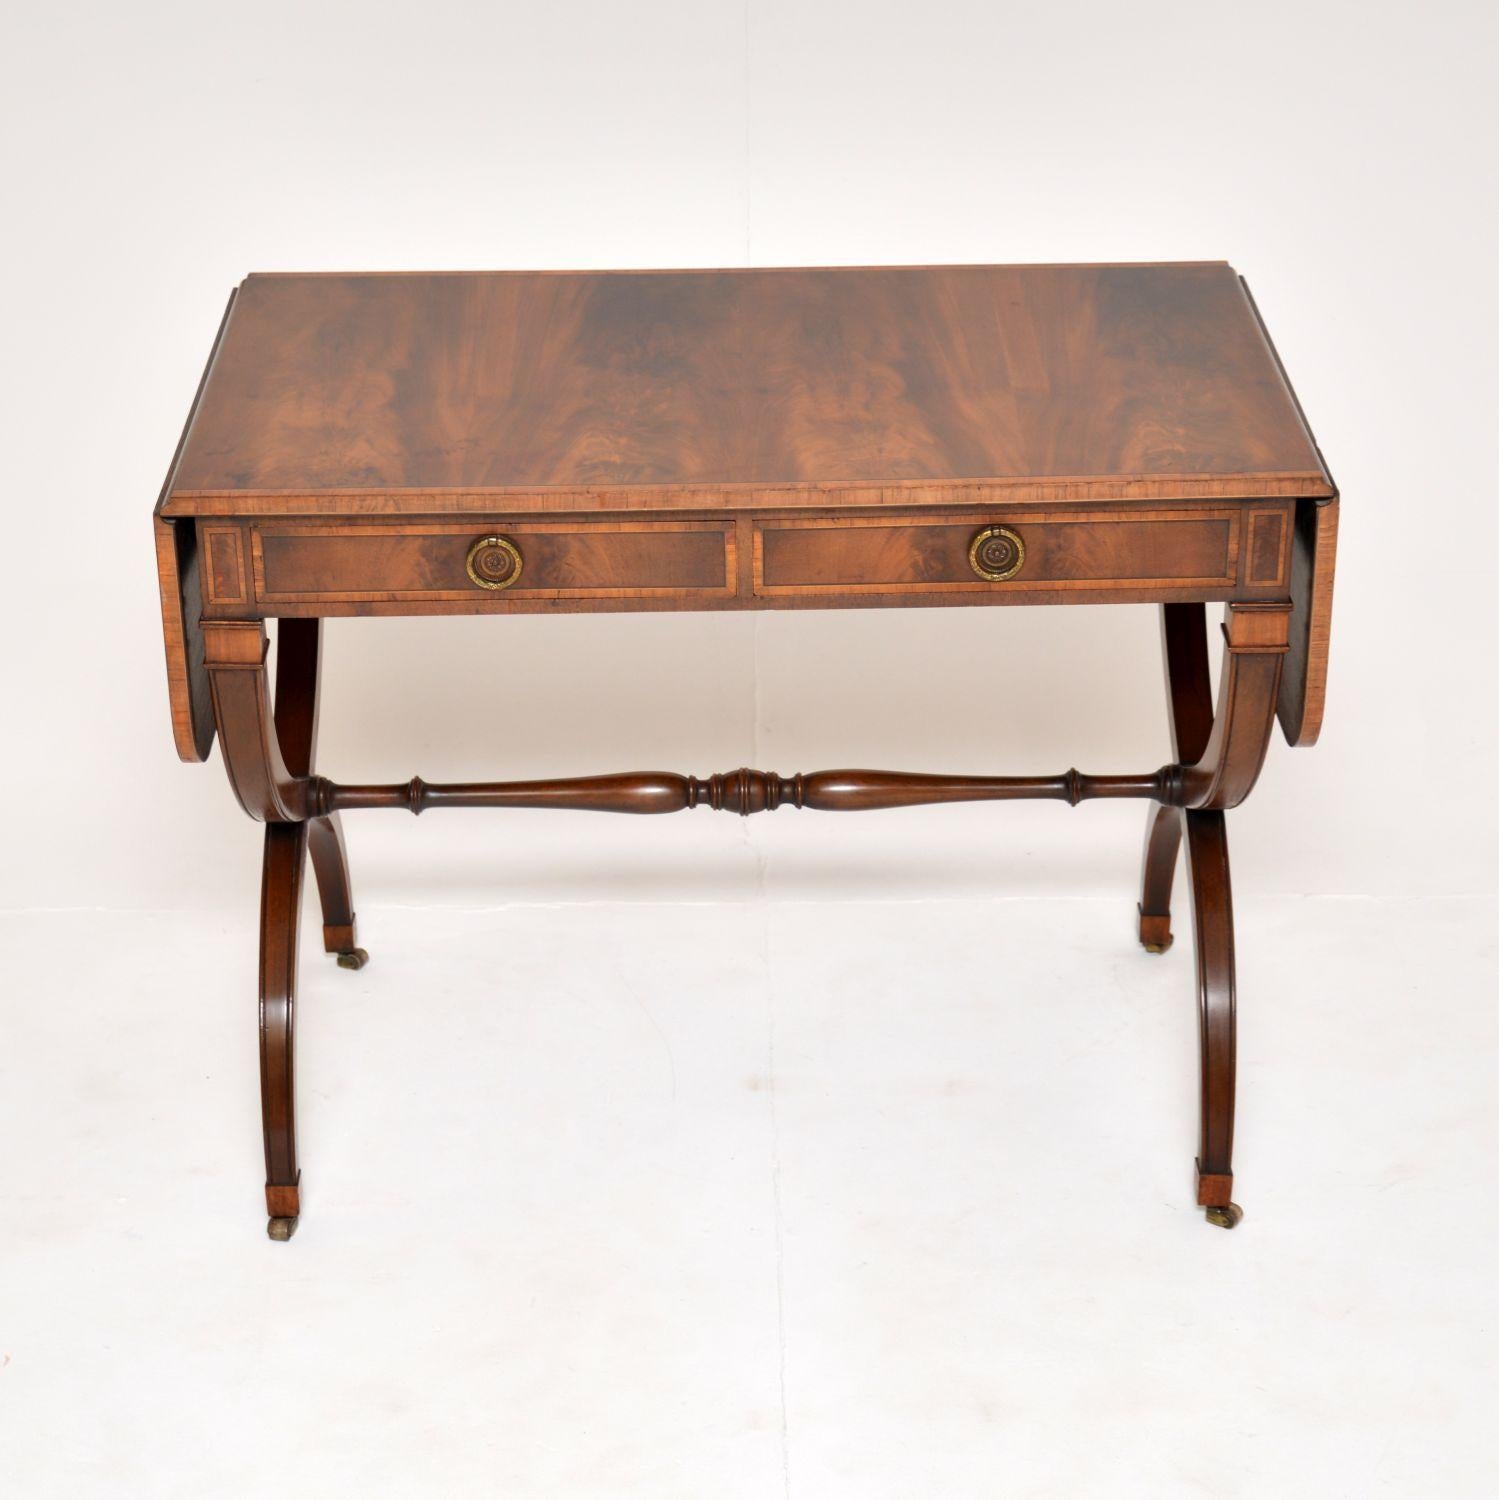 An exceptional antique sofa table in the Regency style. This was made in England, it dates from around the 1920’s.

This is of the utmost quality, the original cabinet makers label is seen inside the drawer. It has an elegant yet sturdy design,